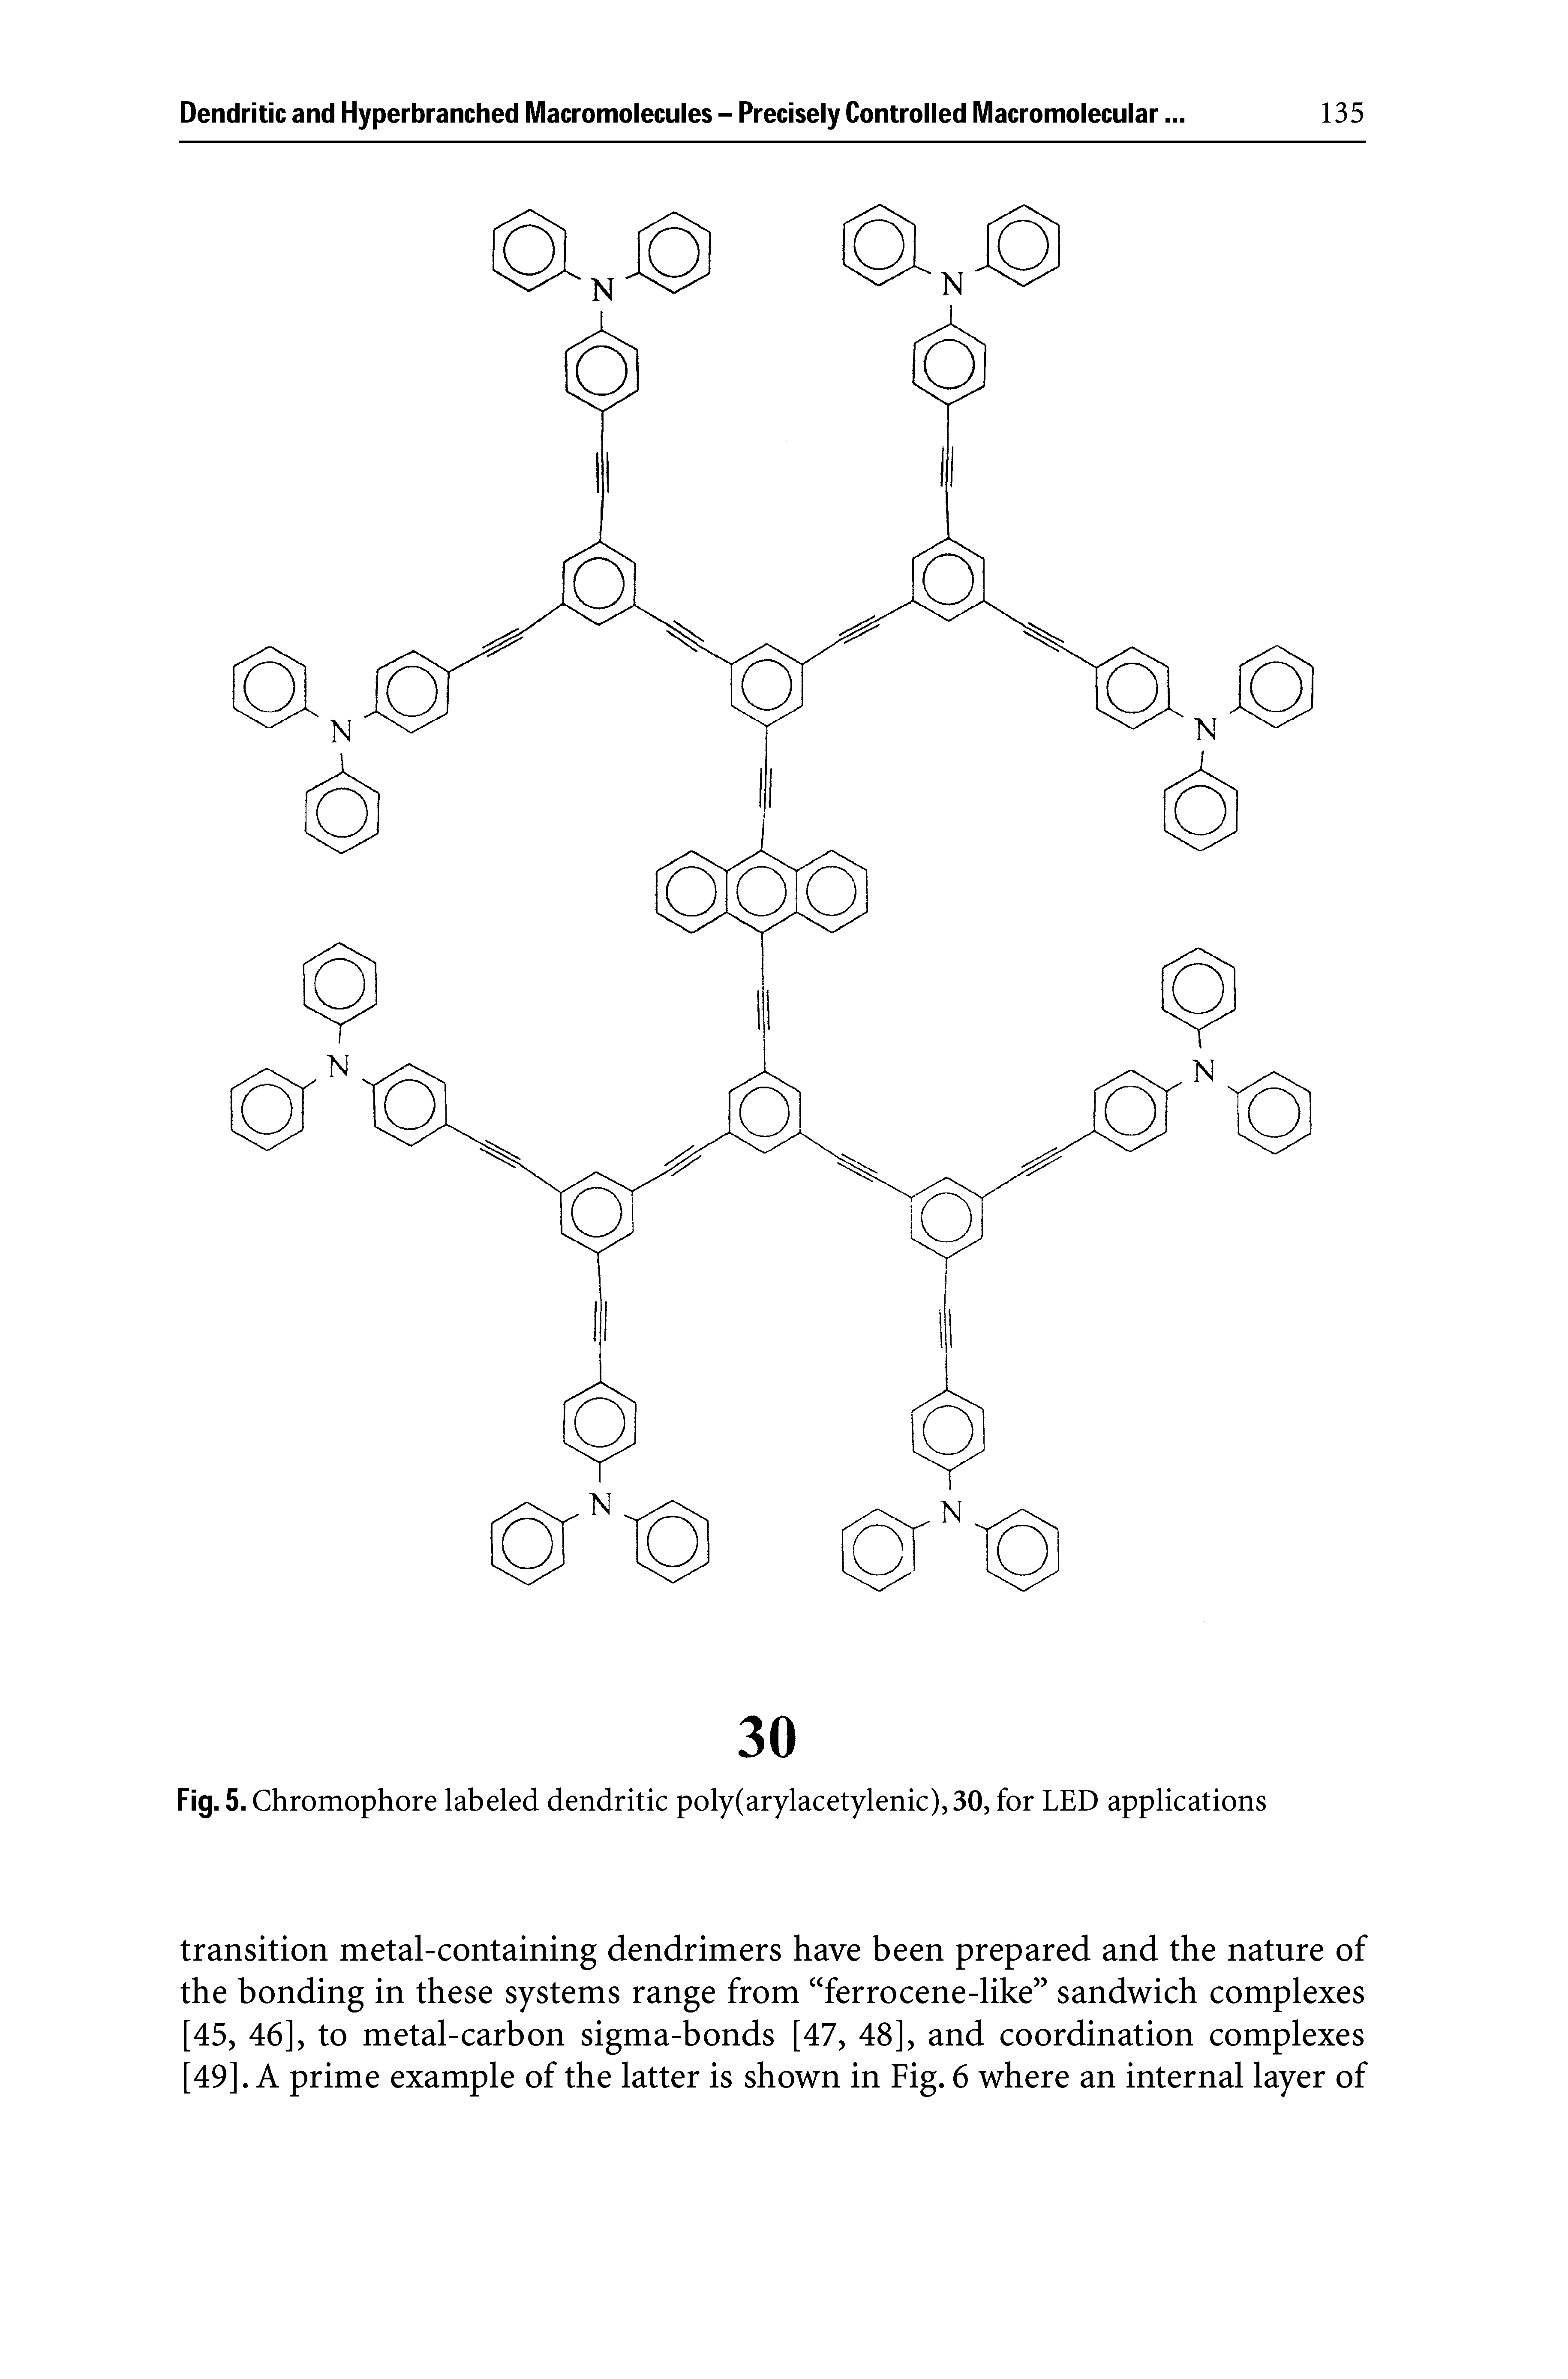 Fig. 5. Chromophore labeled dendritic poly(arylacetylenic),30, for LED applications...